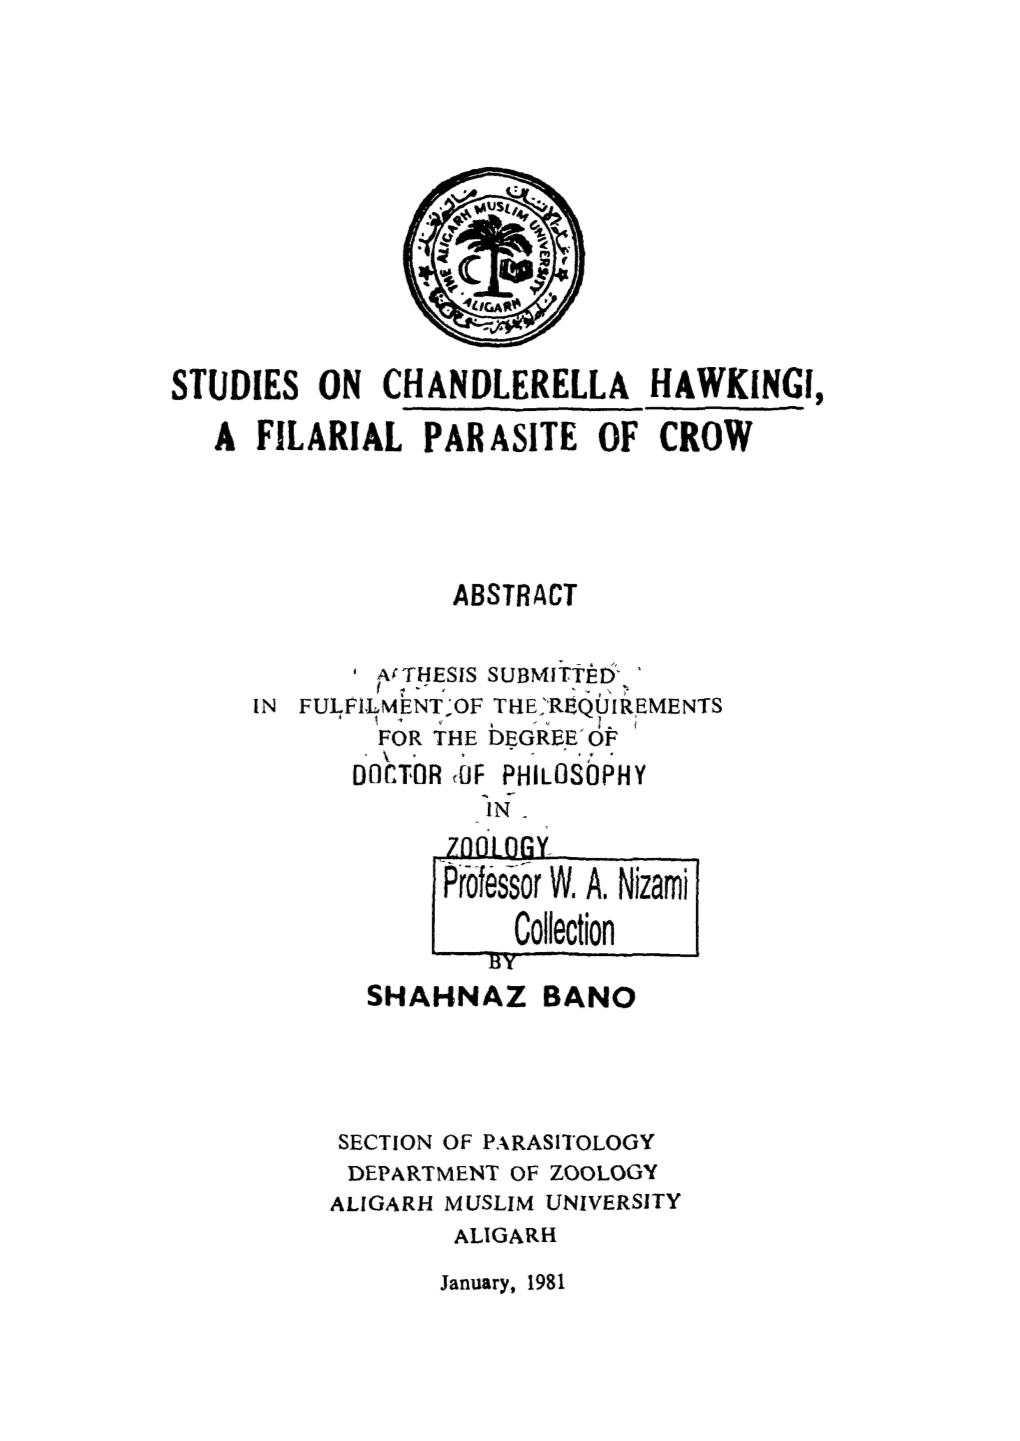 STUDIES on CHANDLERELLA Hawkincf, a FILARIAL PARASITE of CROW